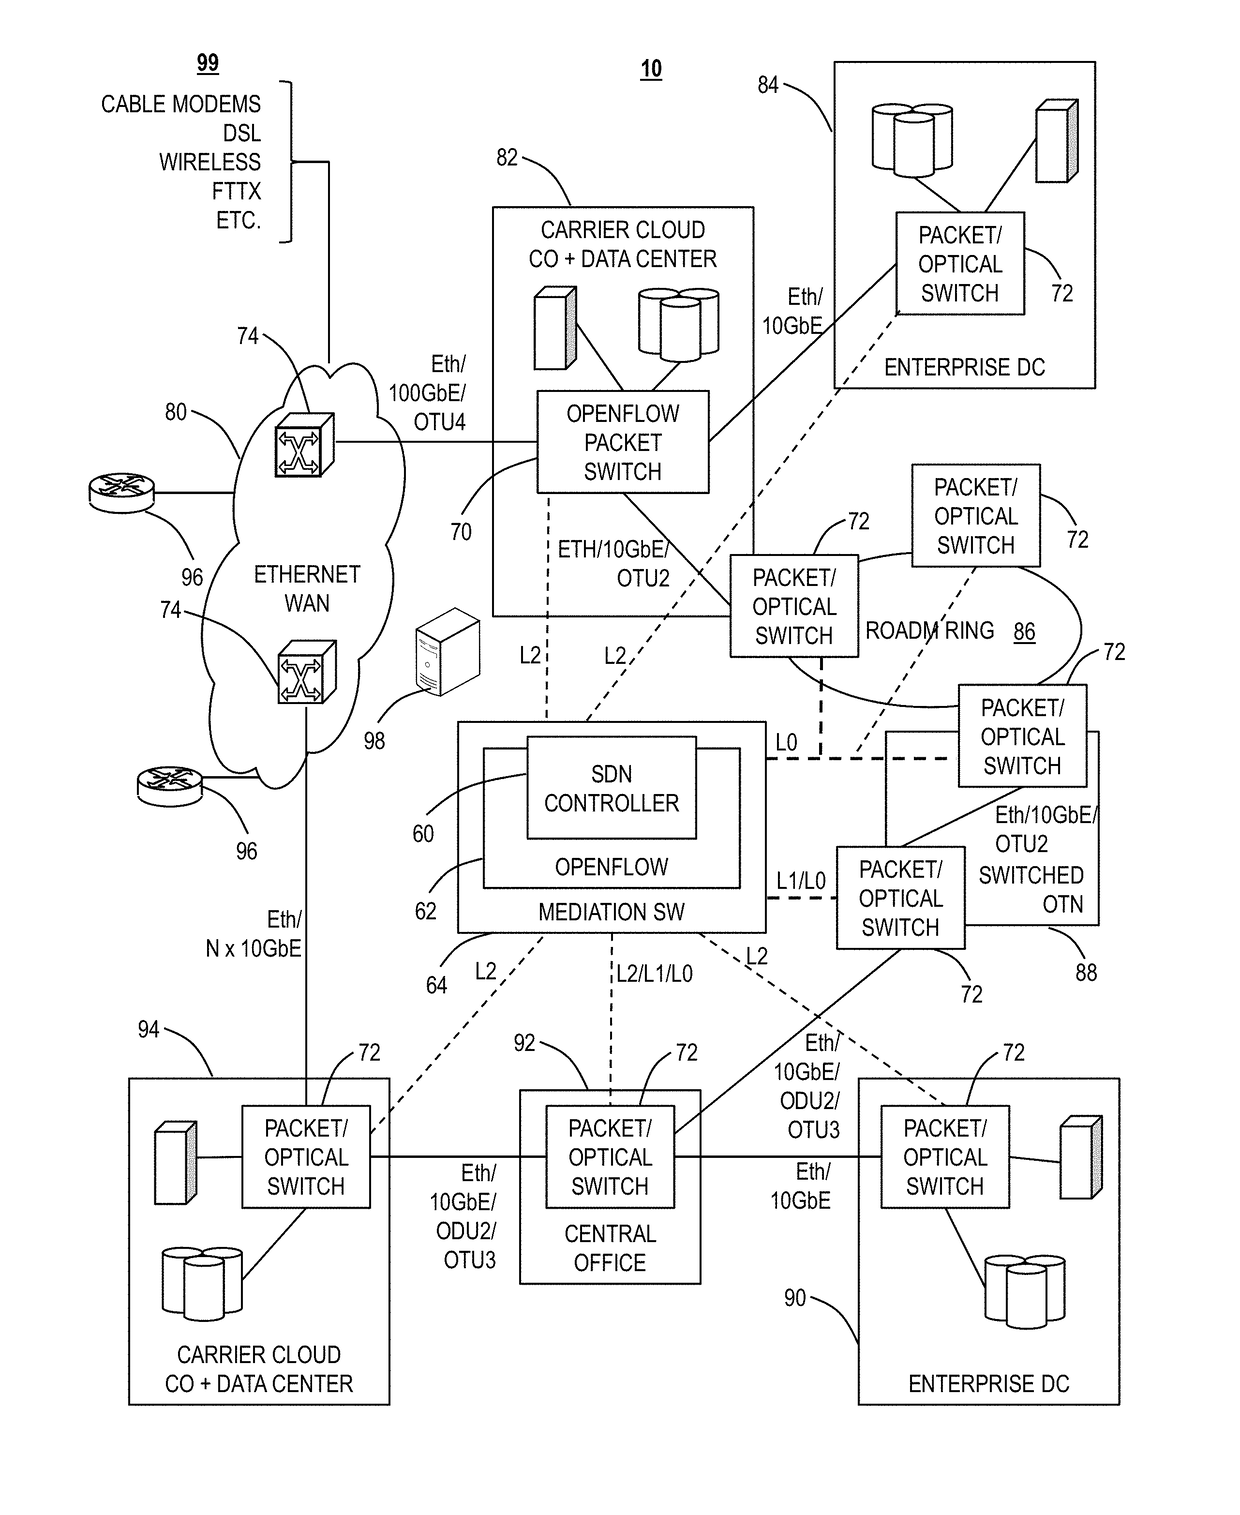 Traffic-adaptive network control systems and methods